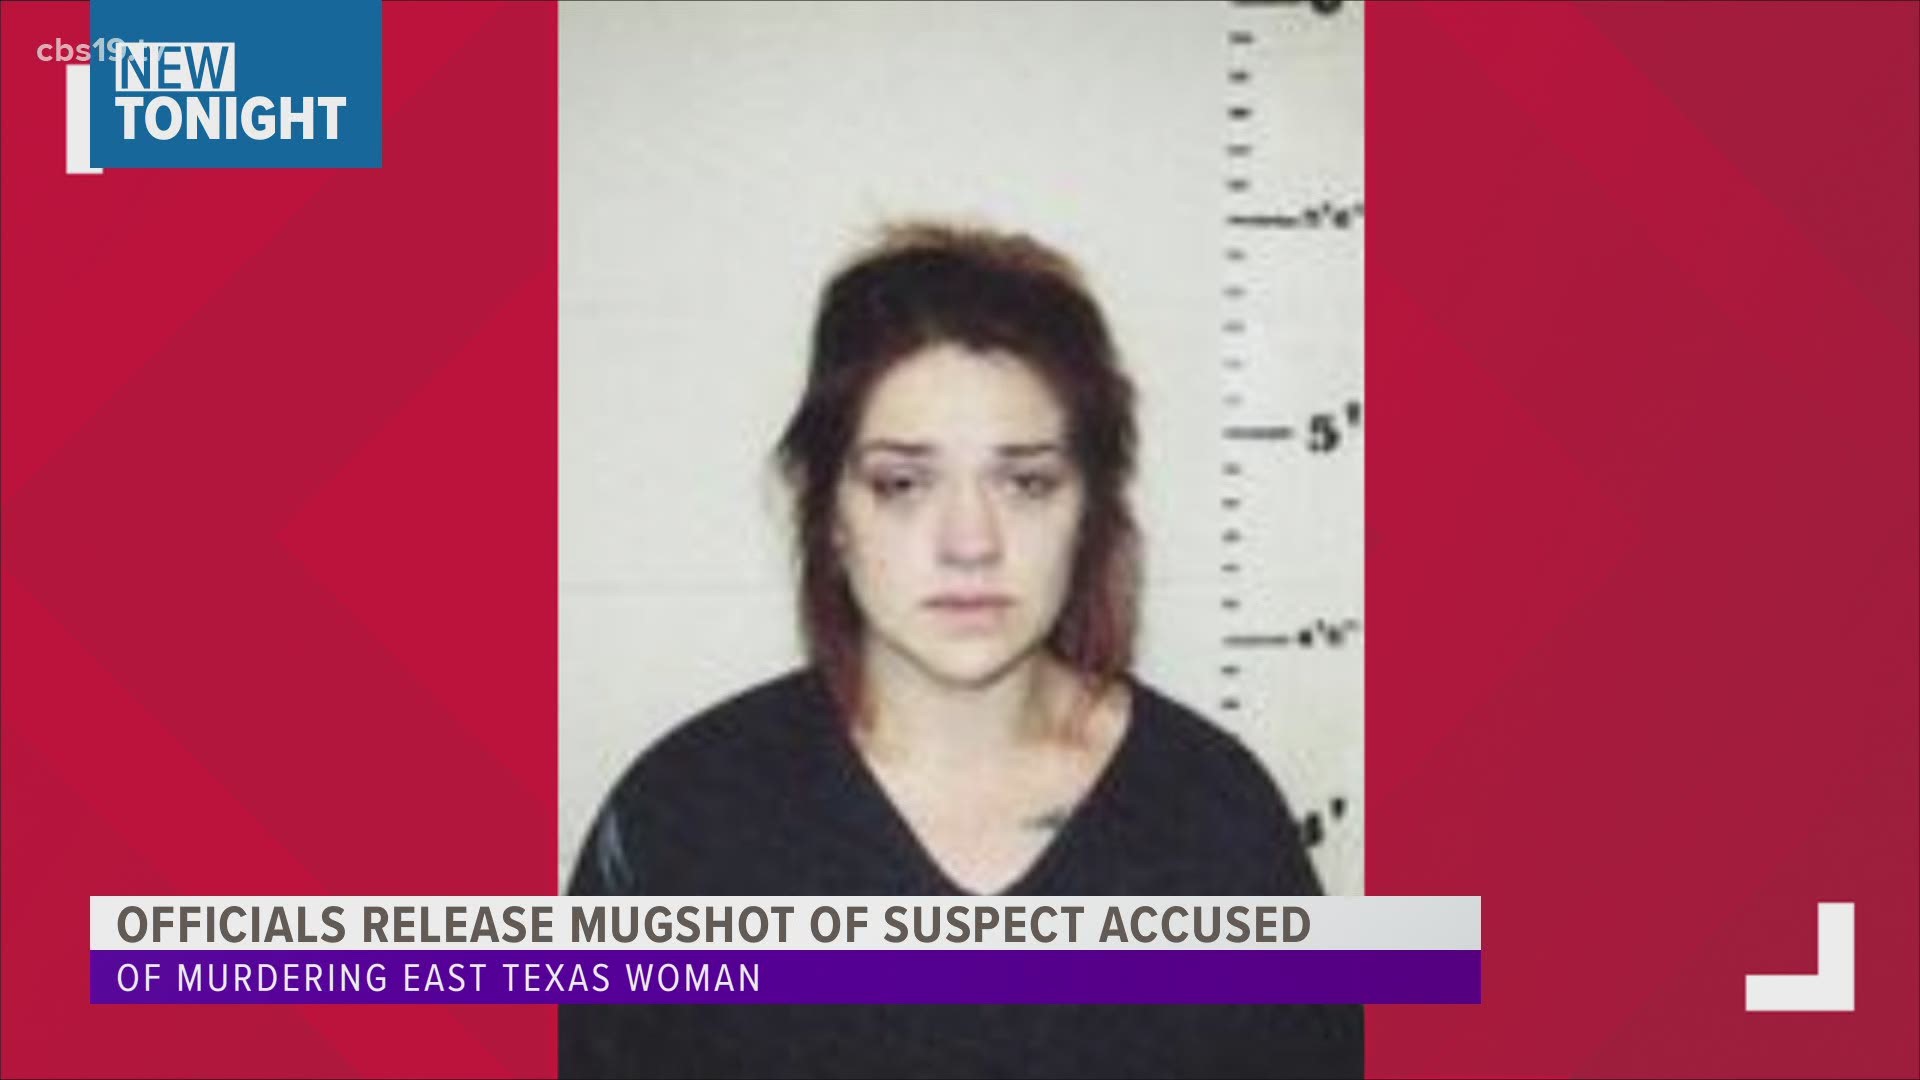 Taylor Rene Parker, 27, was arrested by the Idabel Police Department in Oklahoma.